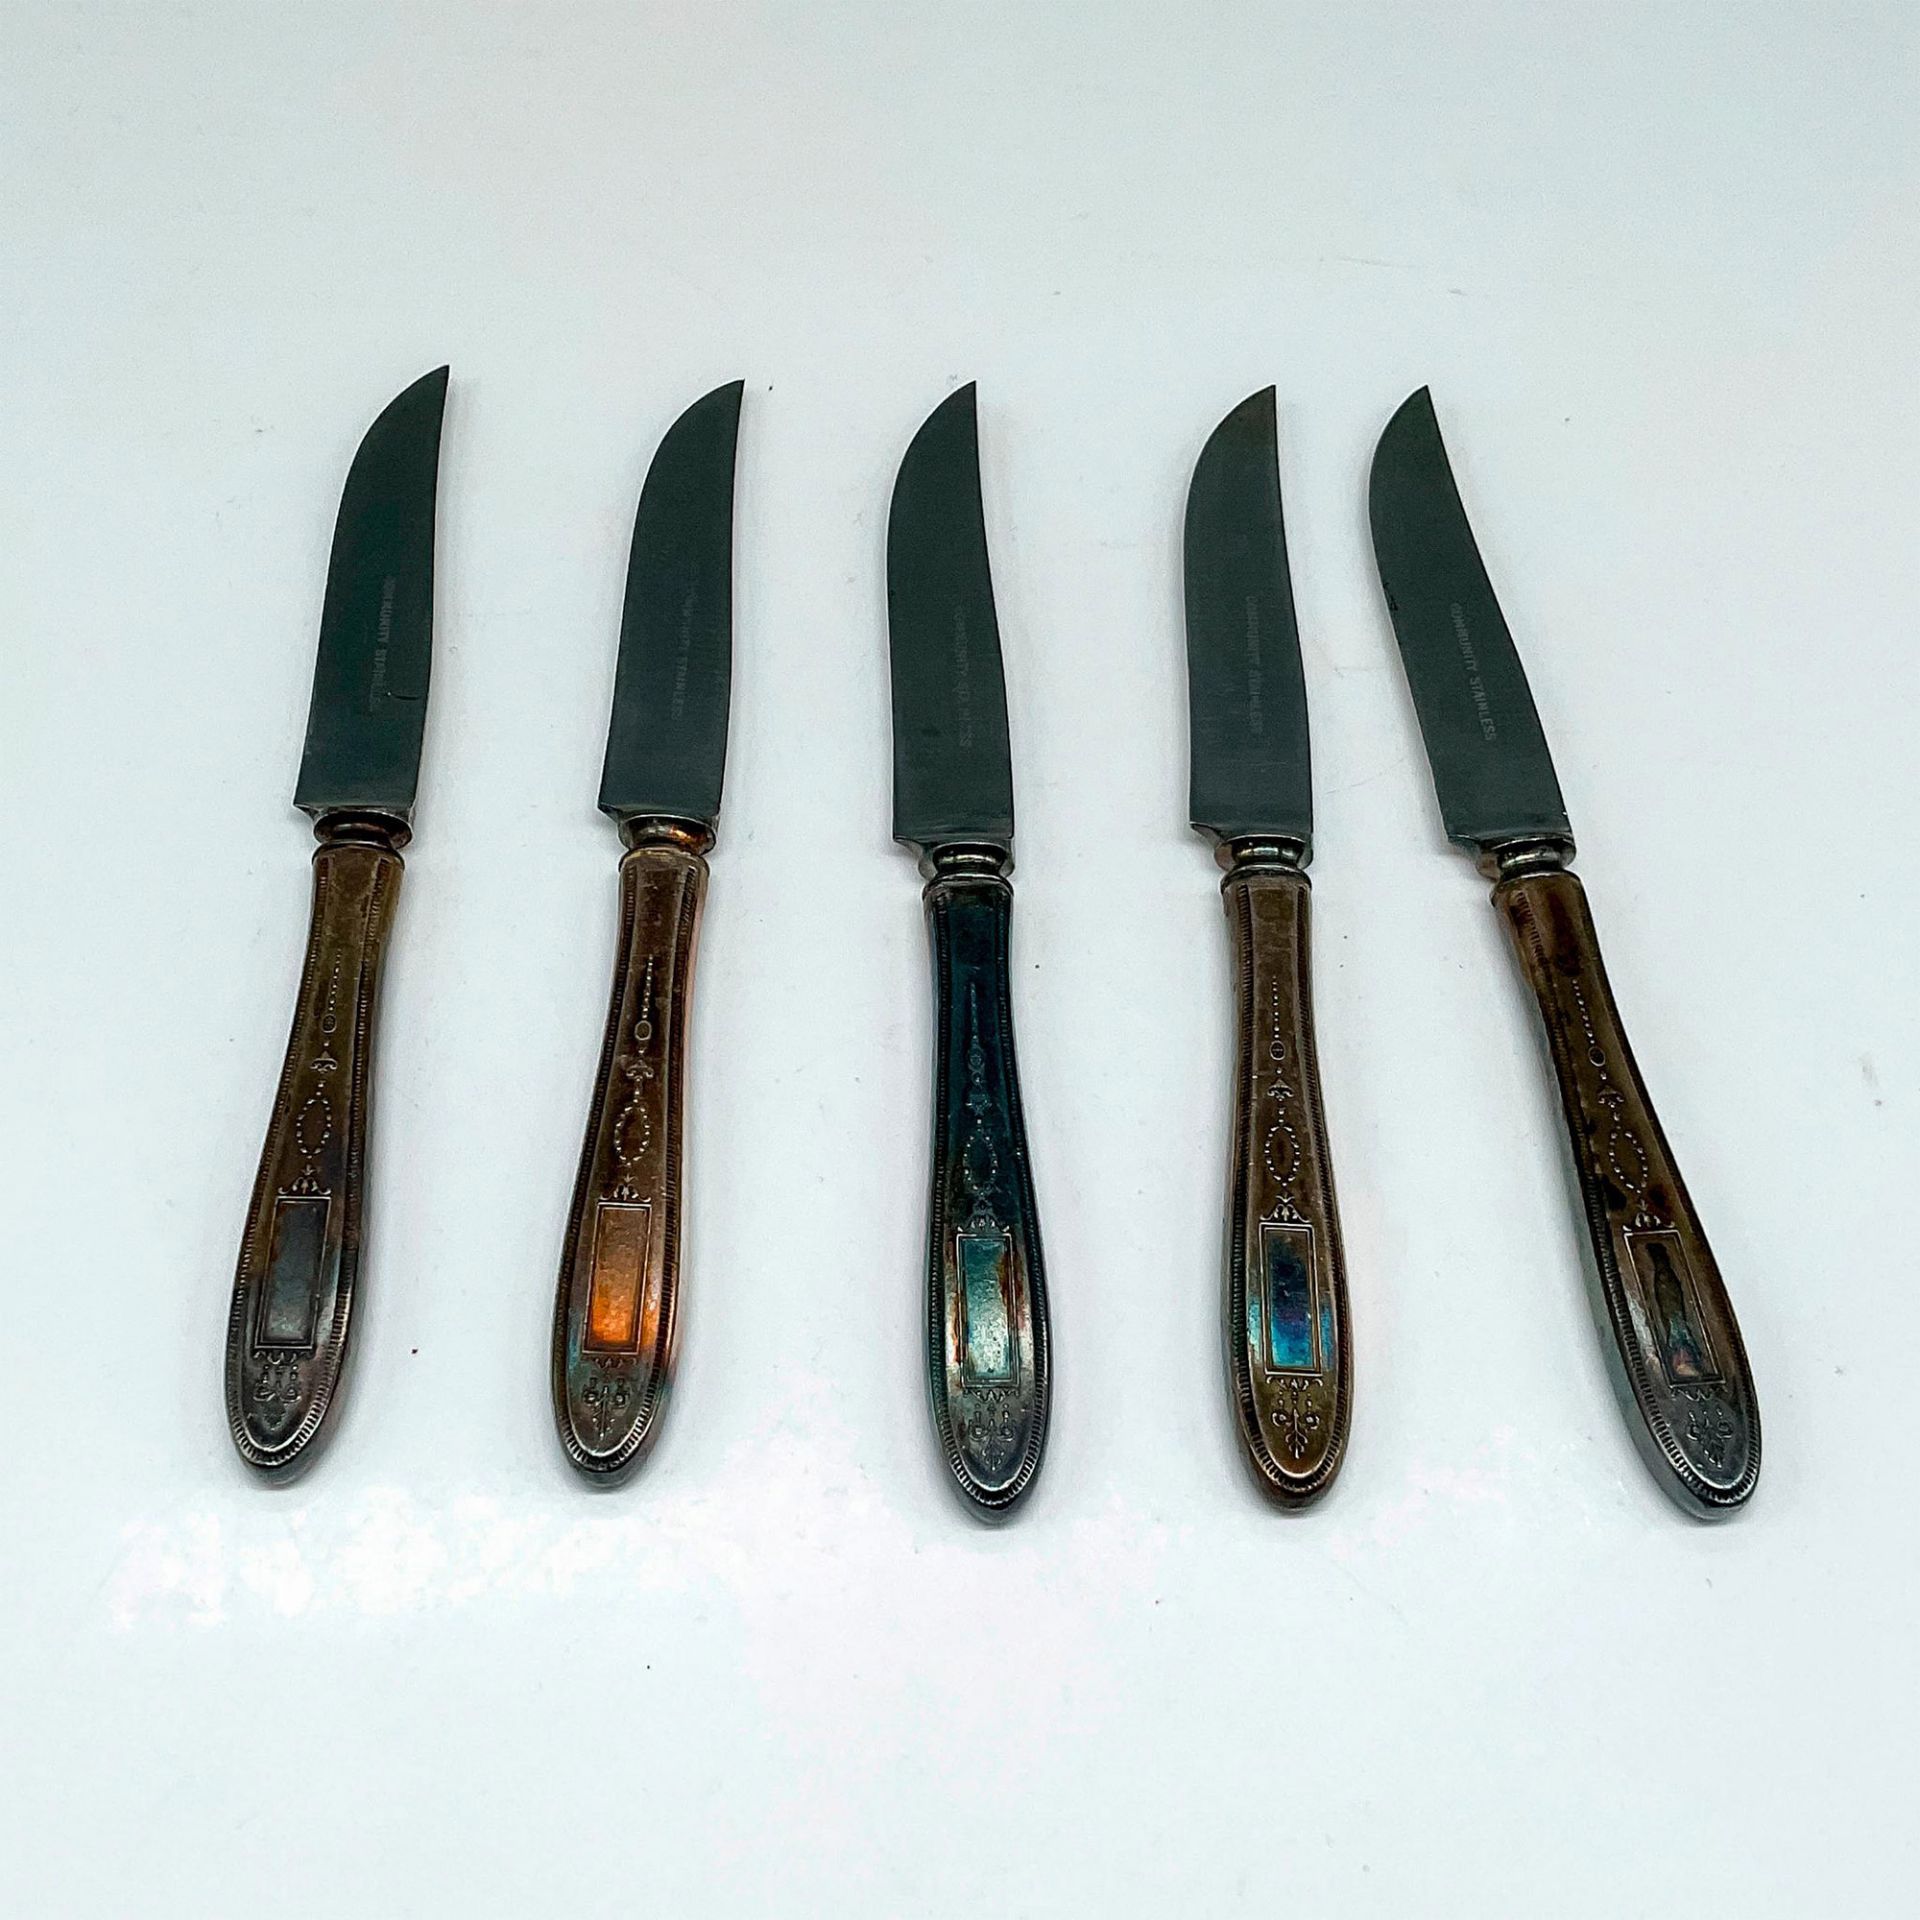 Community Stainless Steel Knives - Image 2 of 2